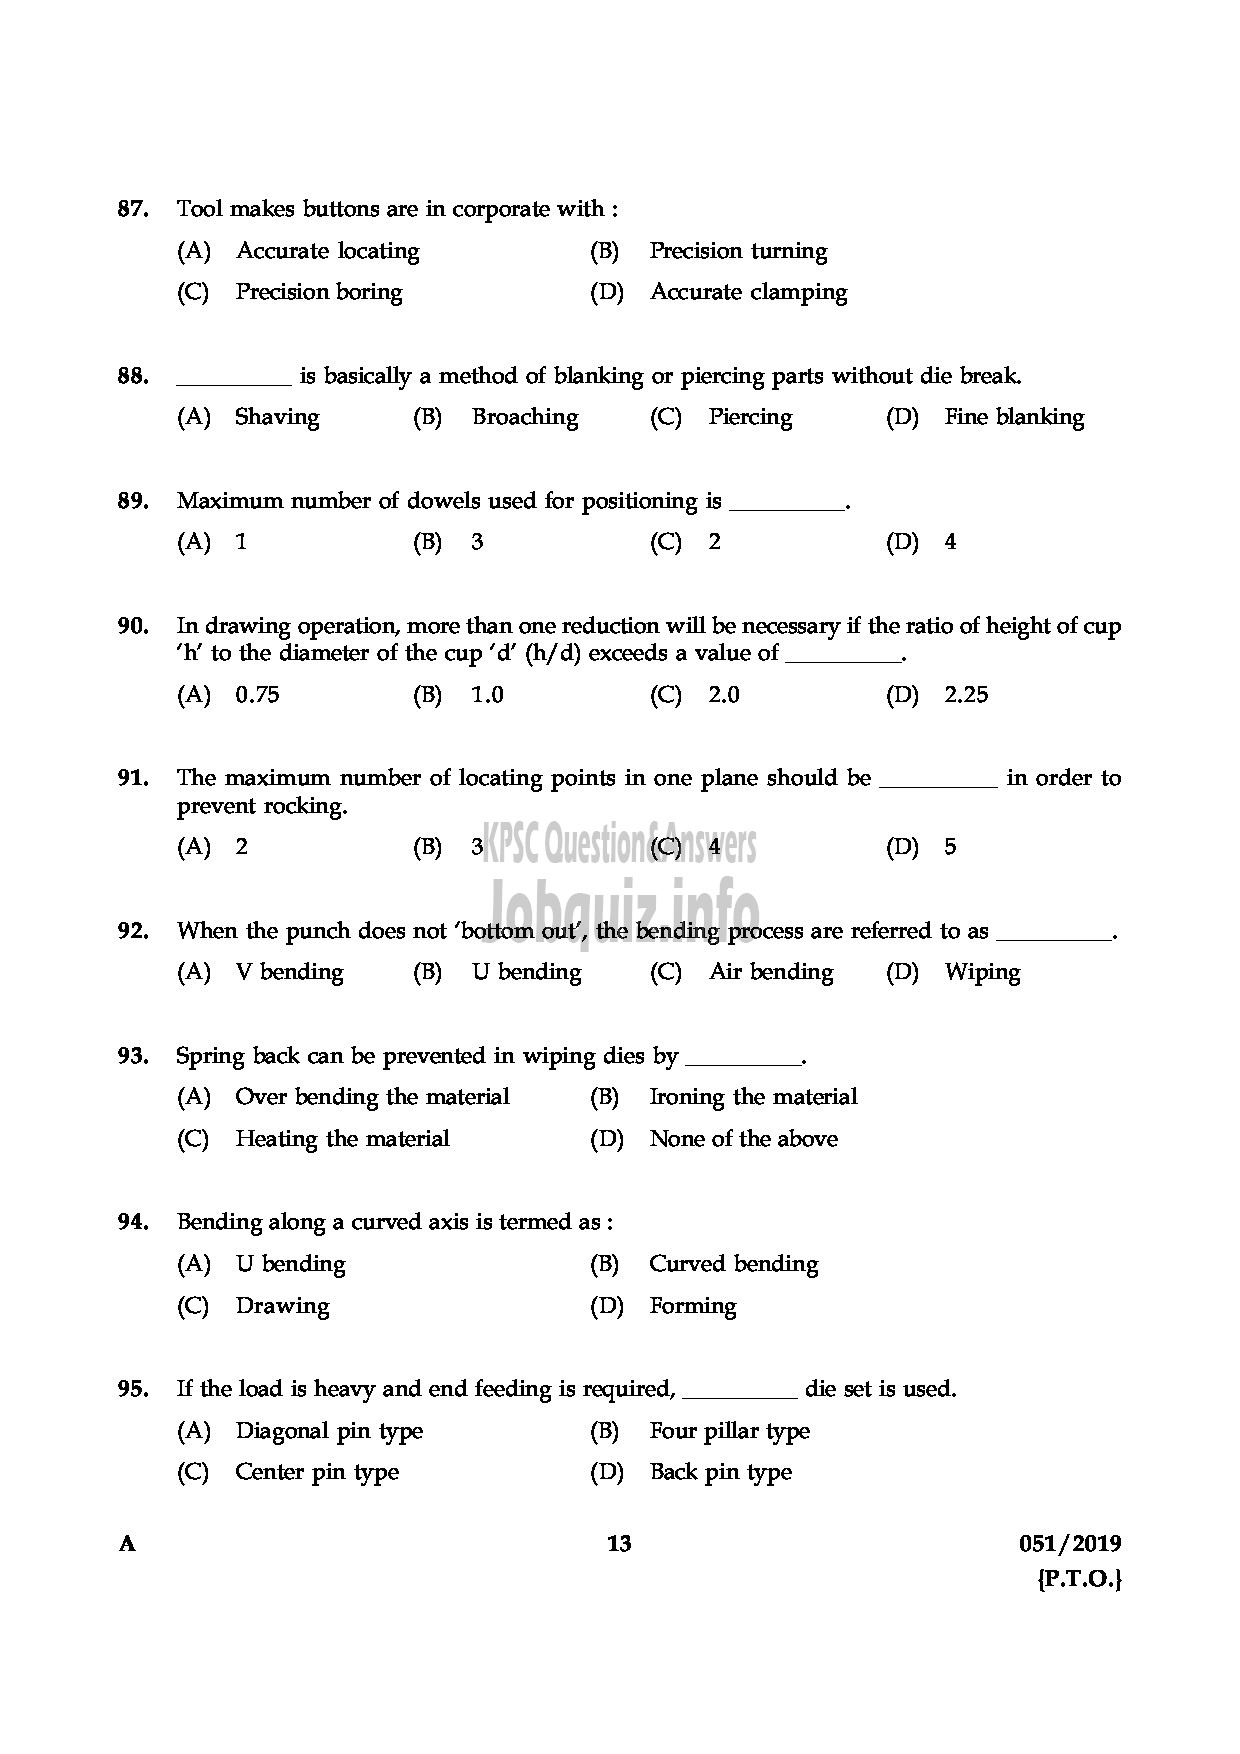 Kerala PSC Question Paper - JUNIOR INSTRUCTOR TOOL & DIE MAKER INDUSTRIAL TRAINING English -13